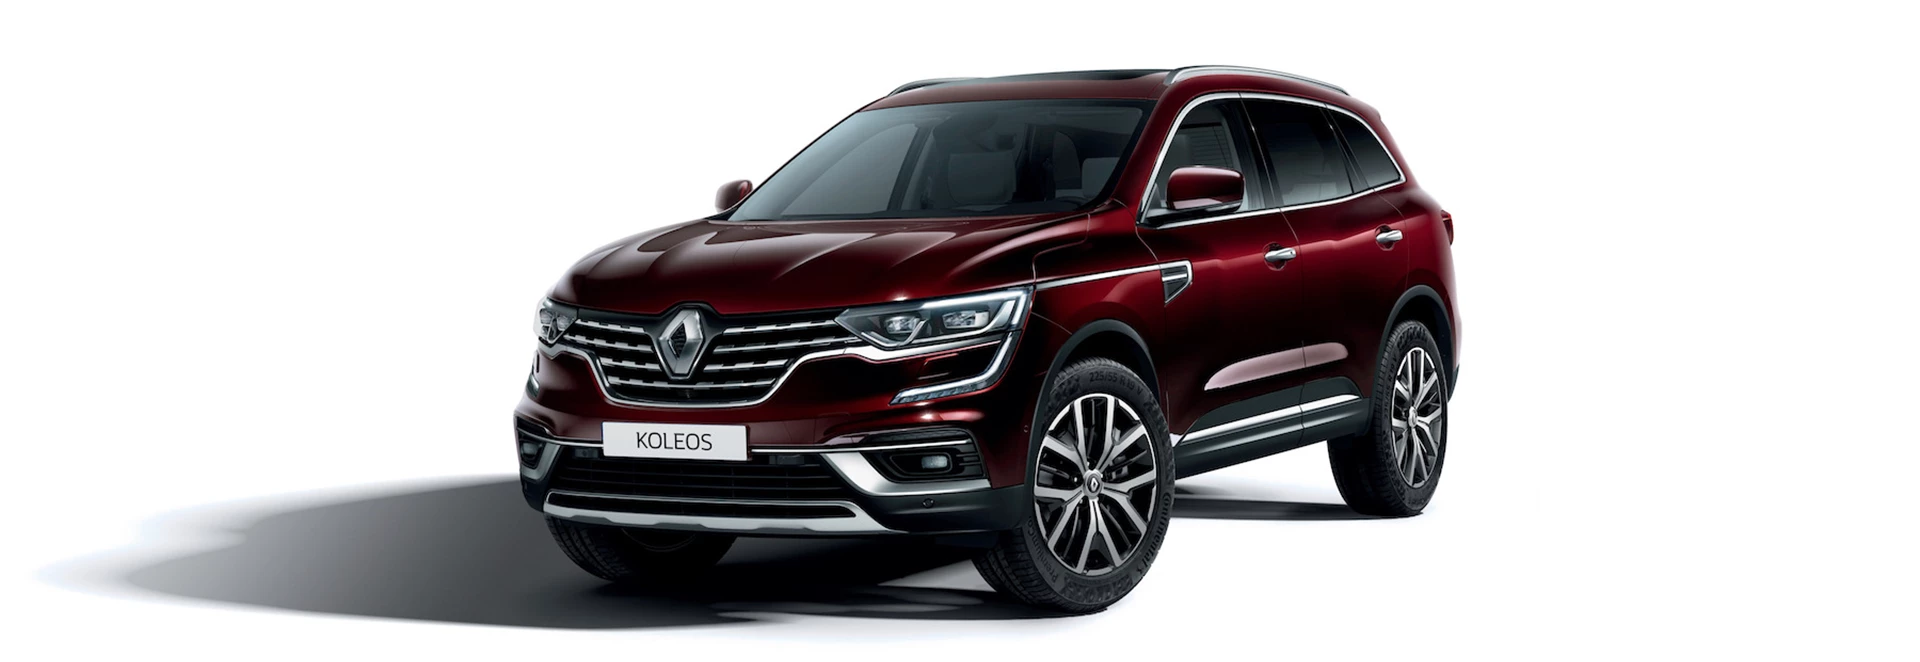 Prices and specifications revealed for 2020 Renault Koleos SUV